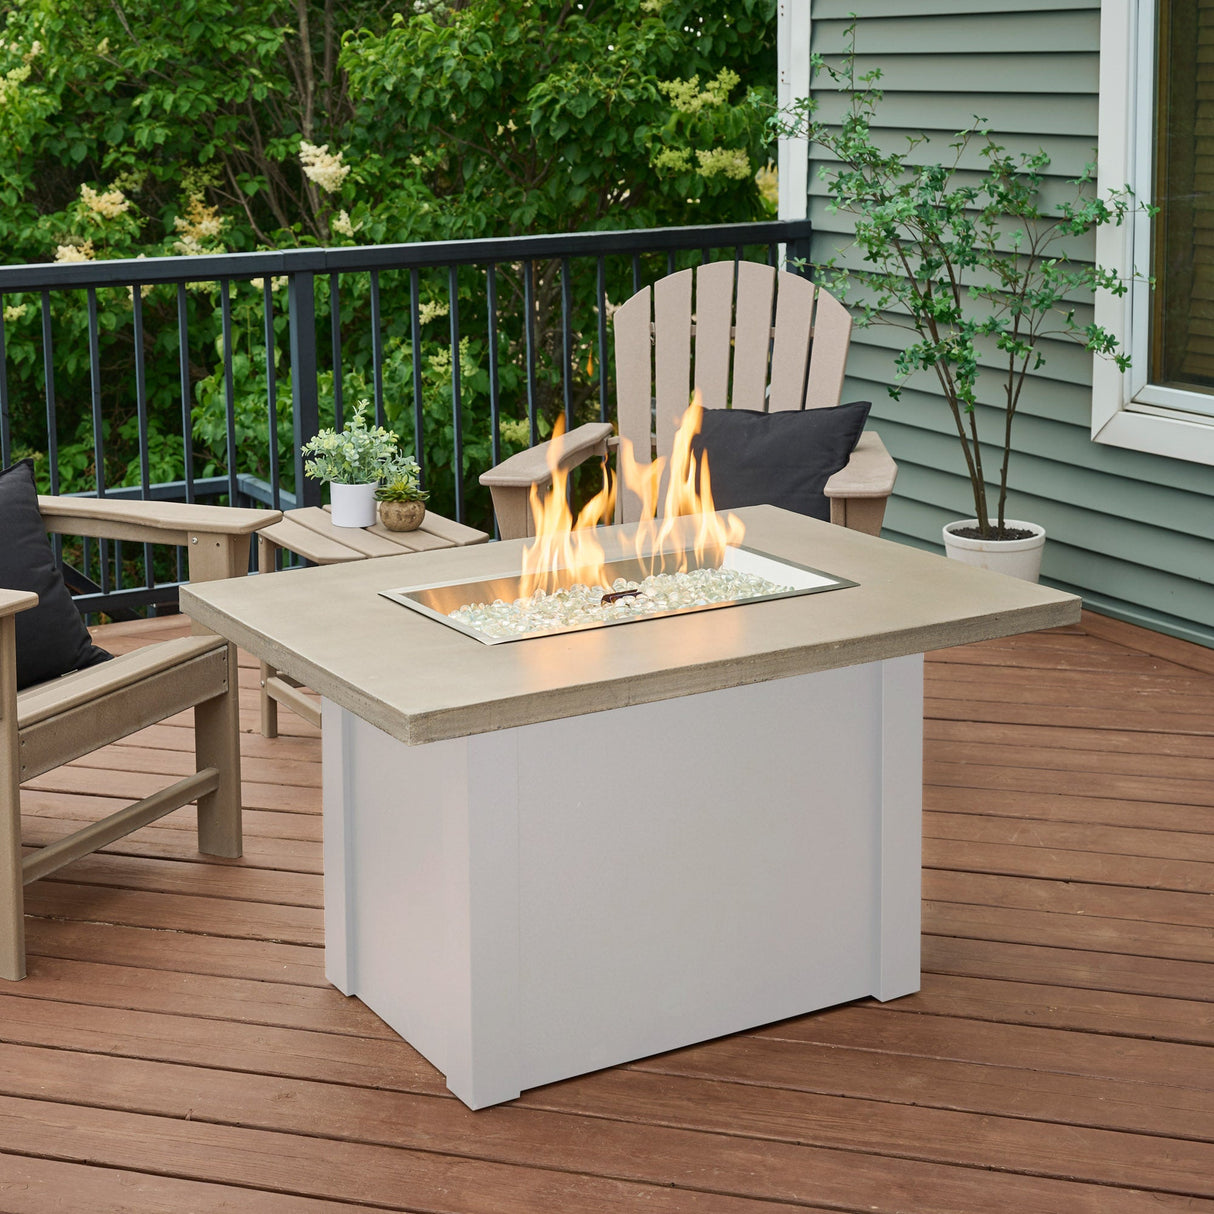 The Havenwood Rectangular Gas Fire Table with a Pebble Grey top and White base being used on an outdoor deck setup